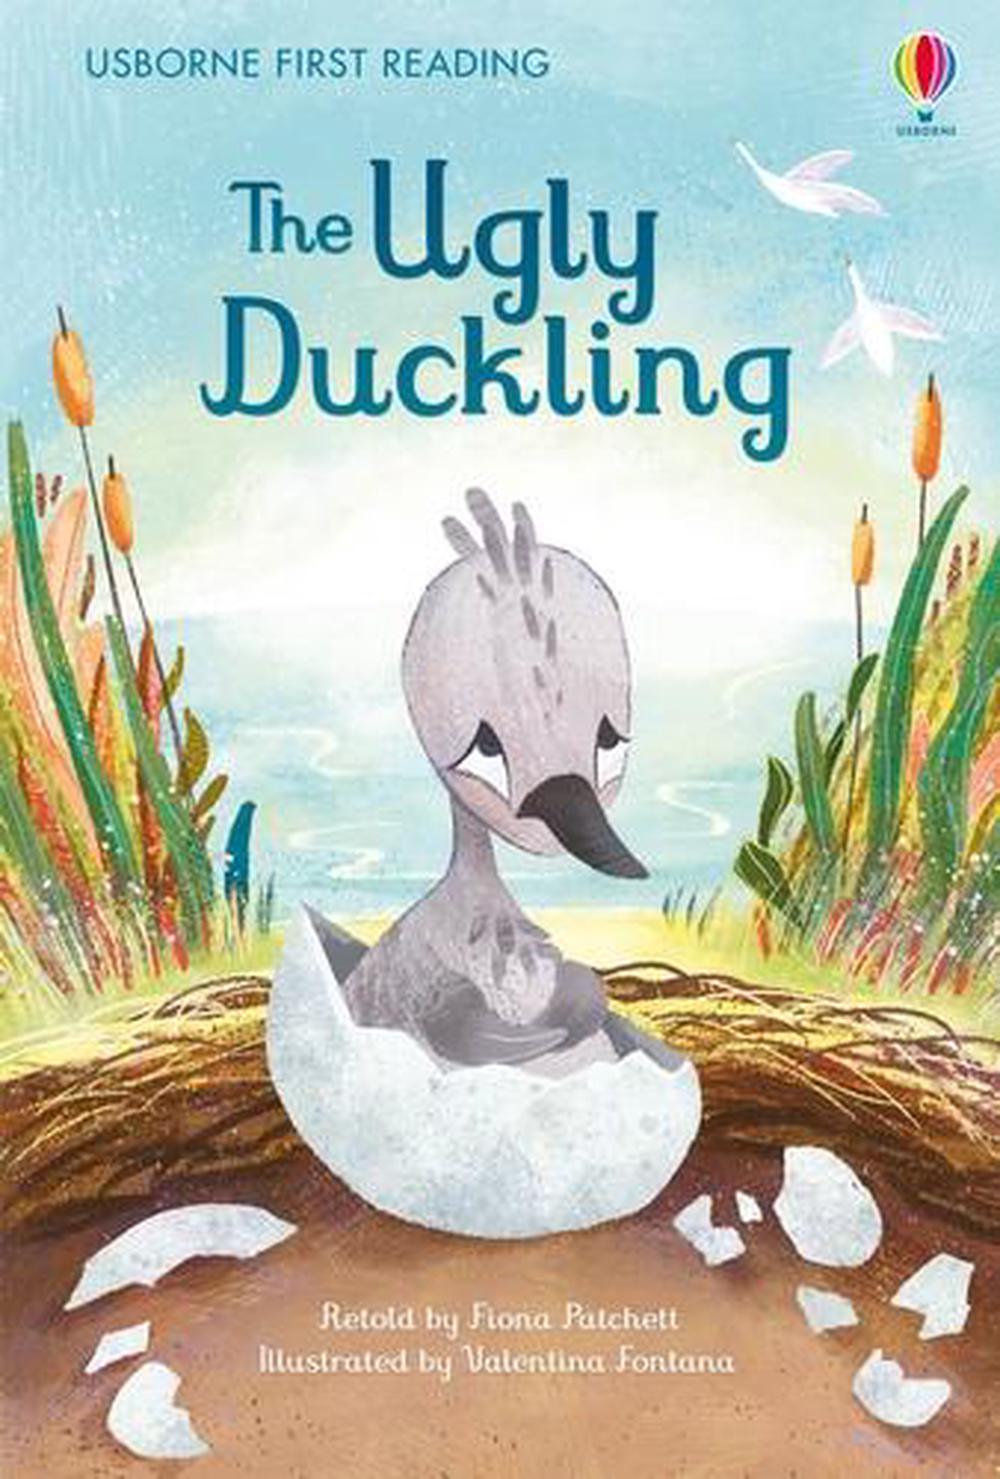 original ugly duckling story